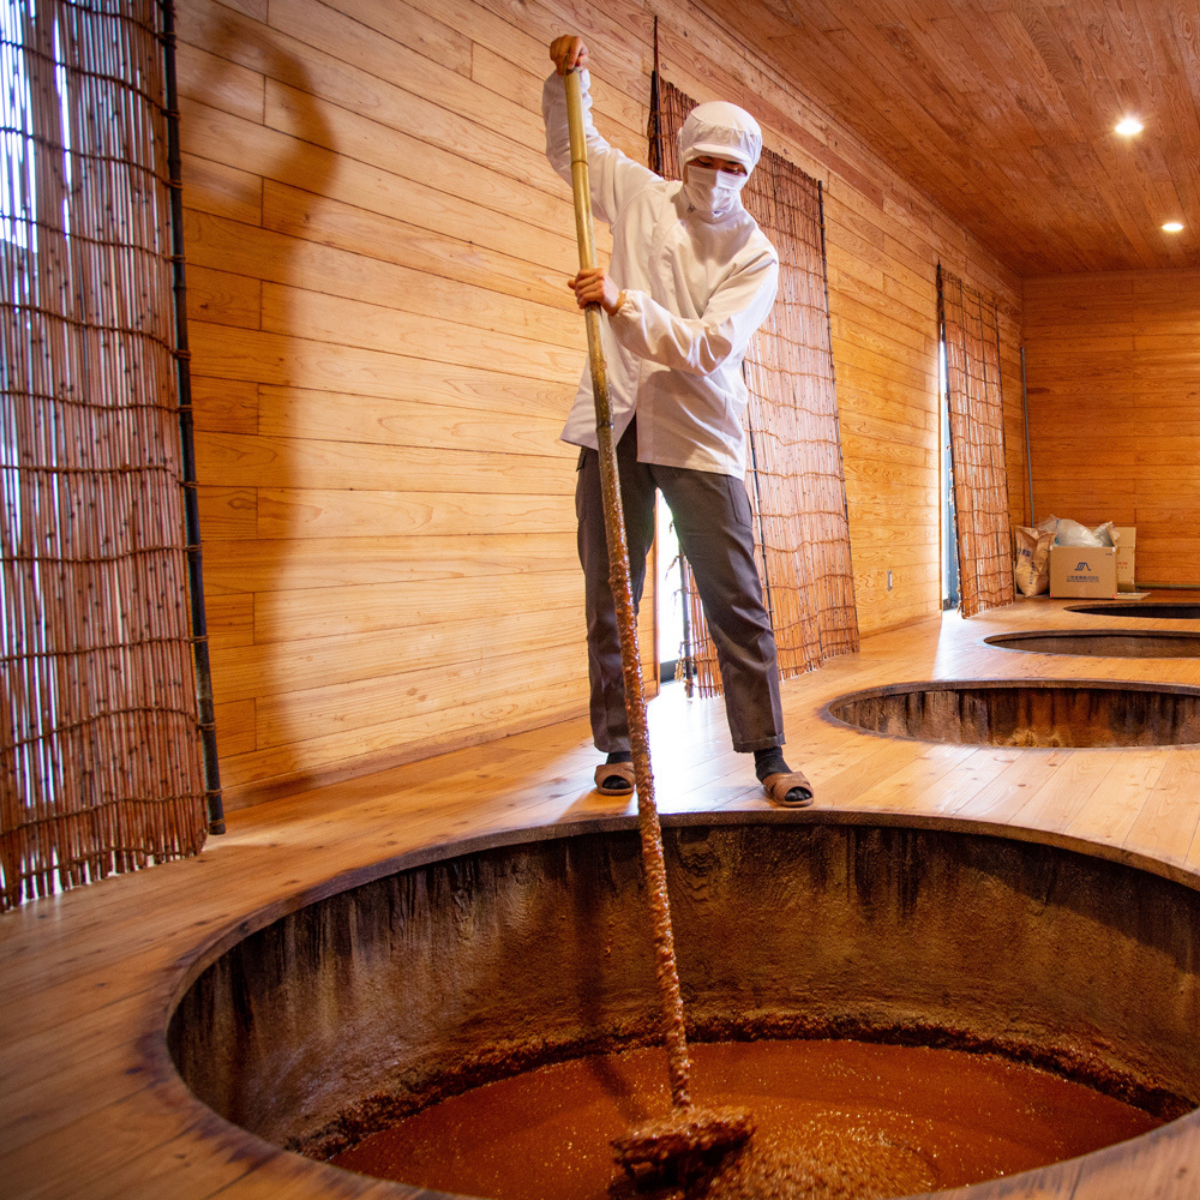 Man stirring soy sauce with a large wooden stick